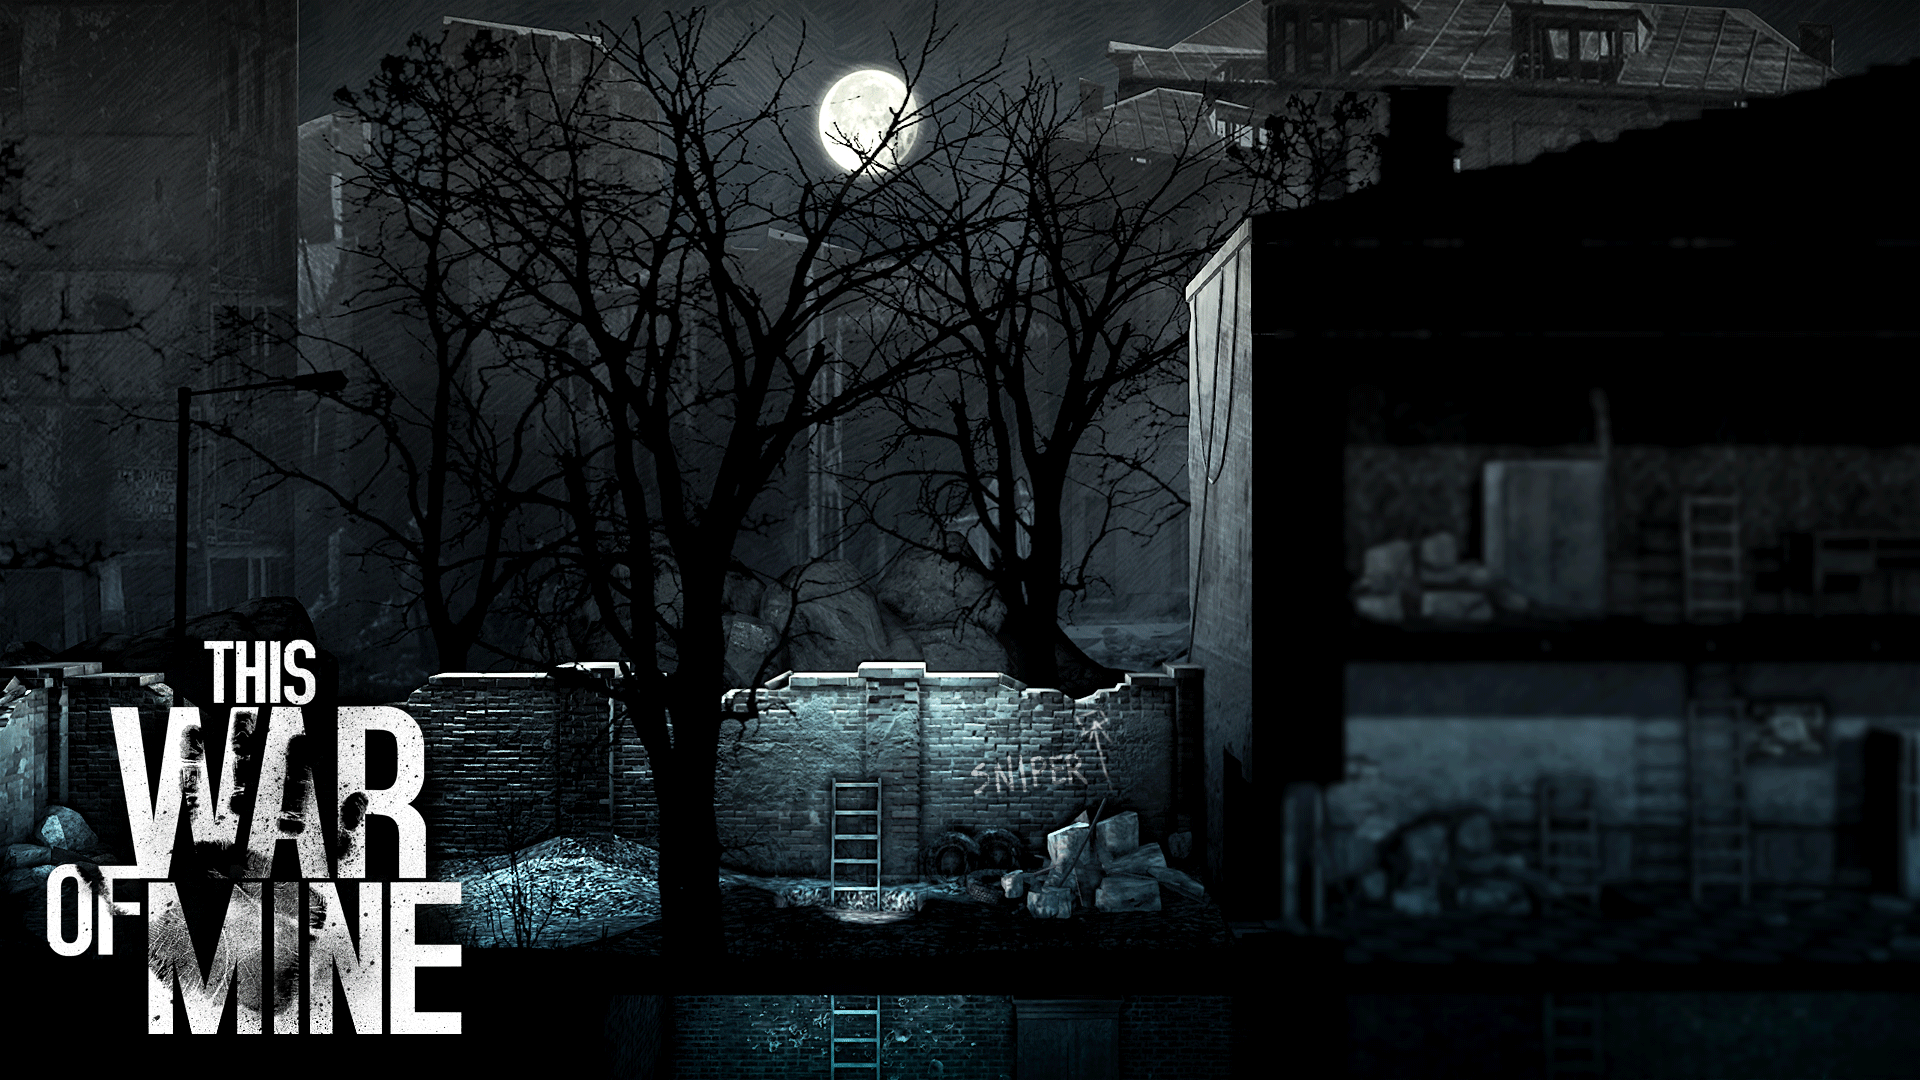 This War of Mine: Complete Edition XSX